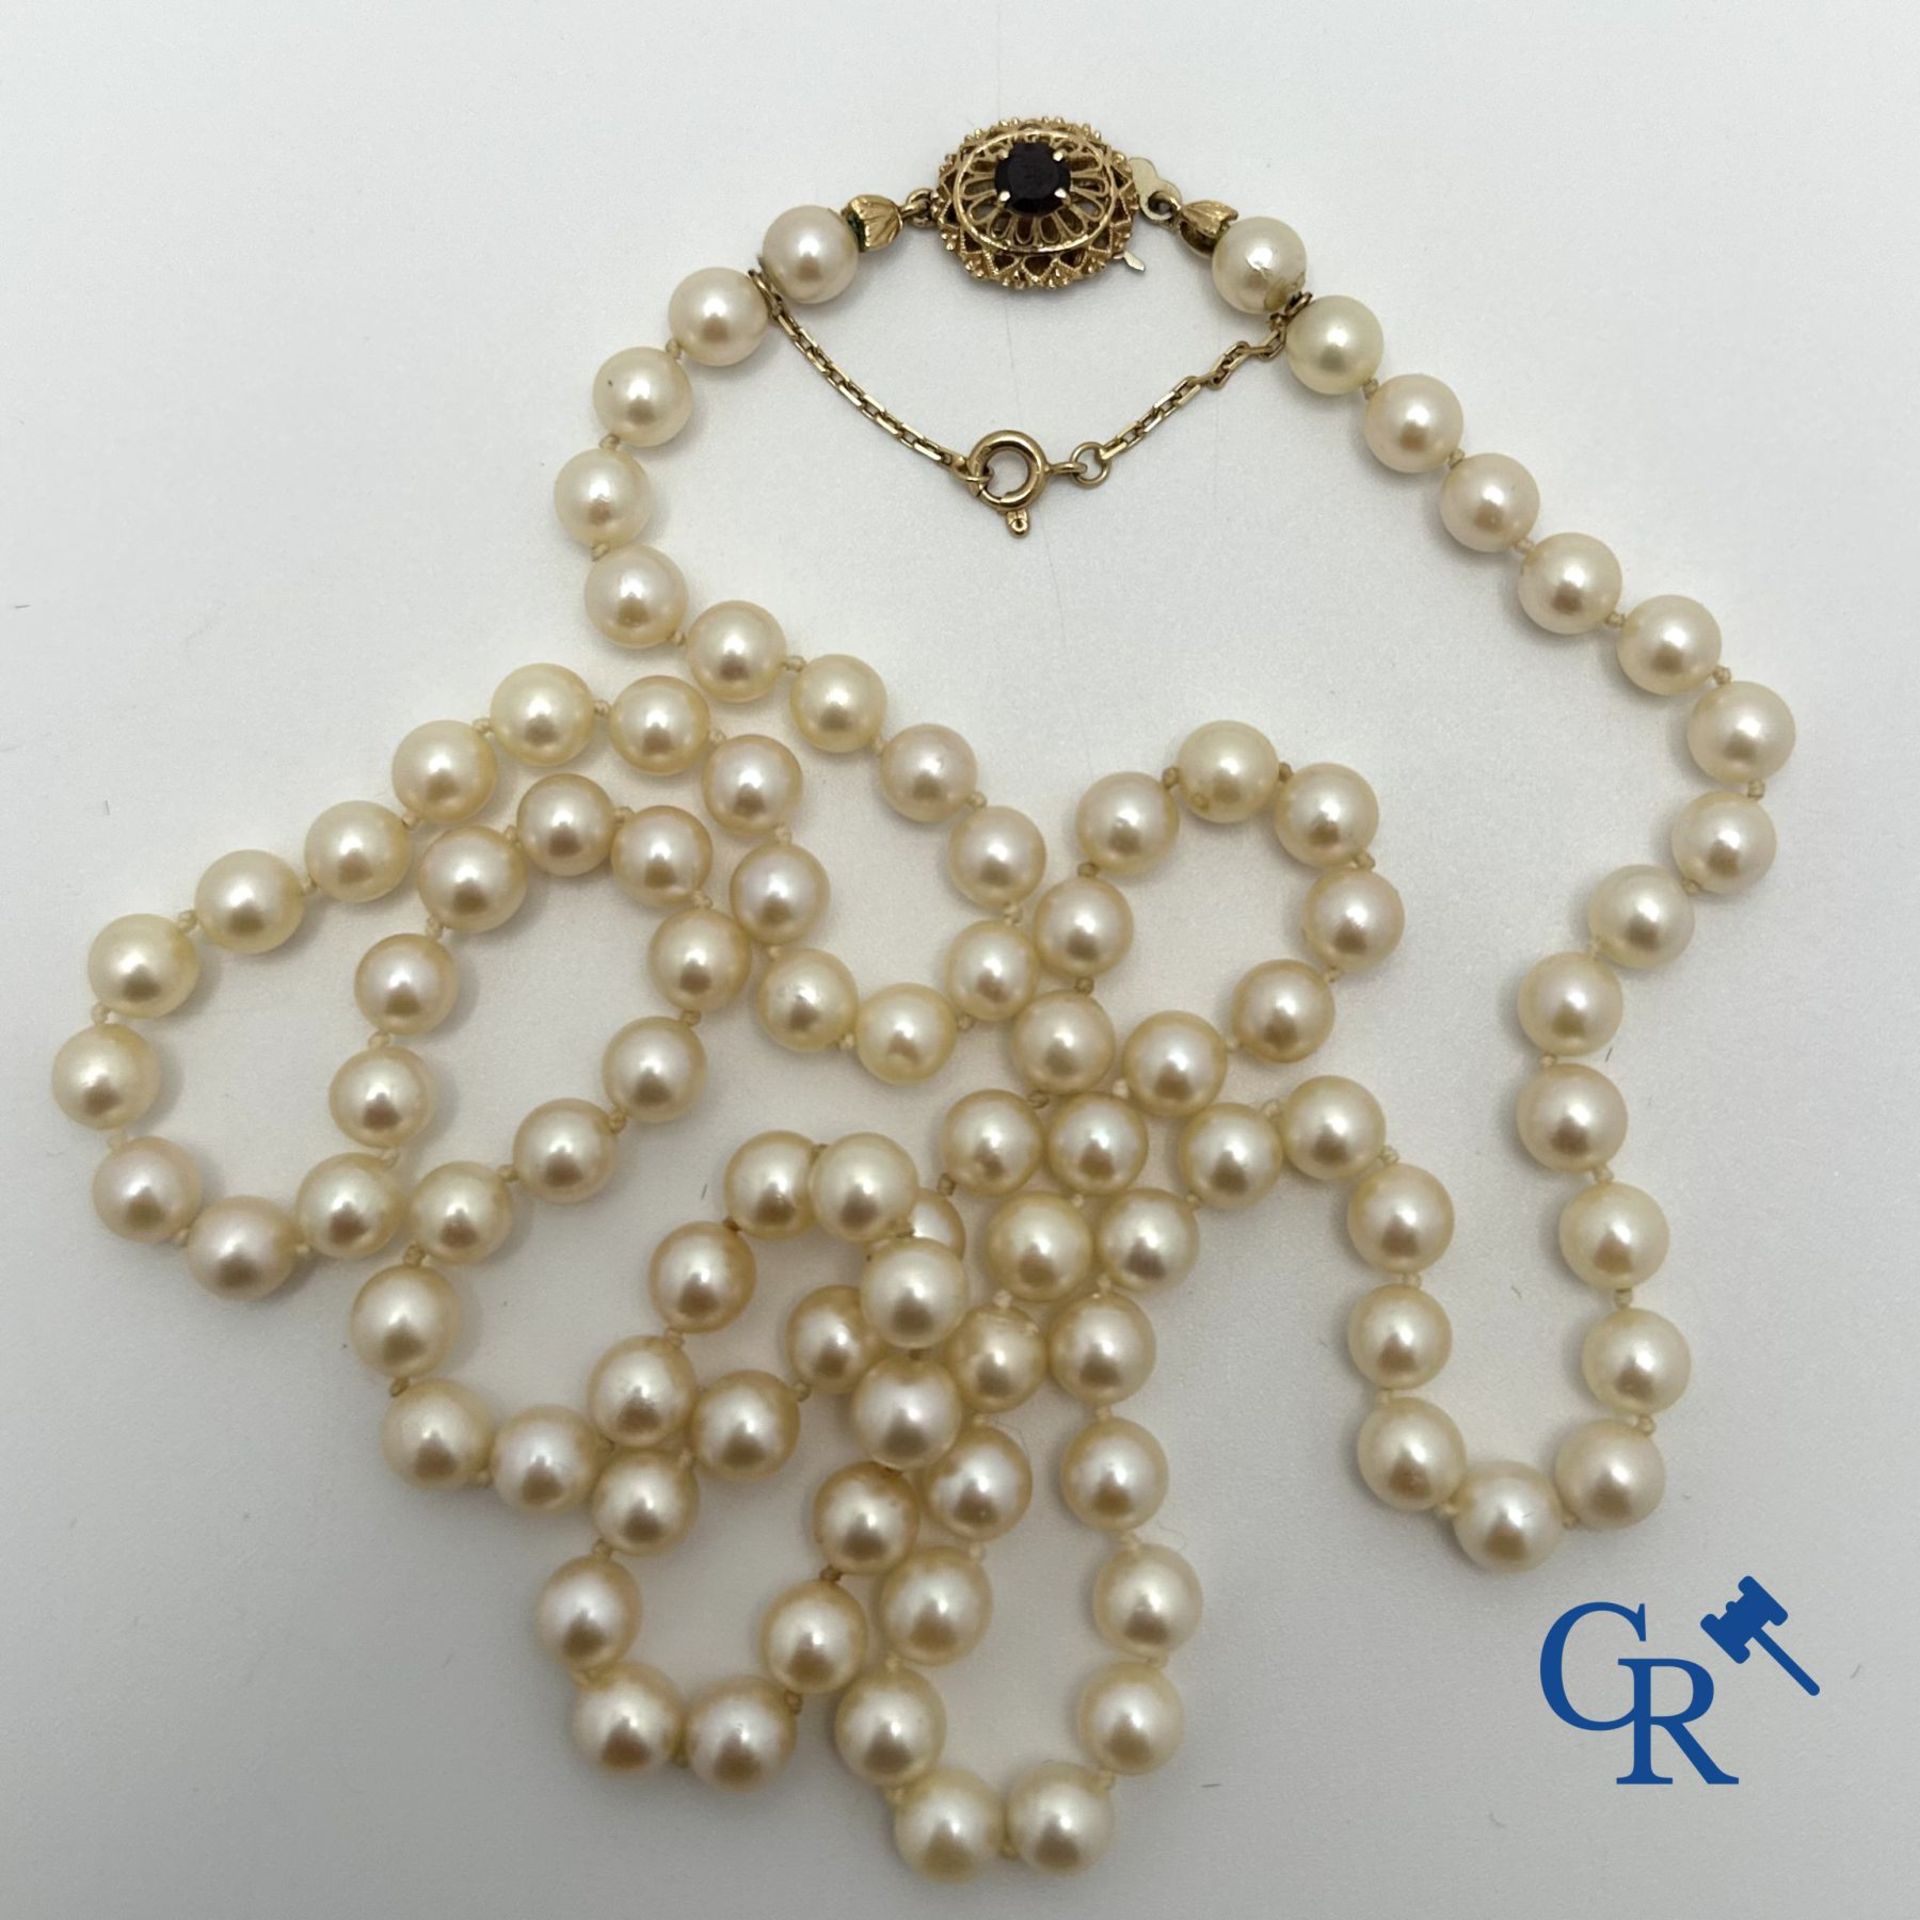 Jewellery: Lot consisting of a pearl necklace with gold clasp 18K and a pair of earrings in gold 18K - Image 3 of 6